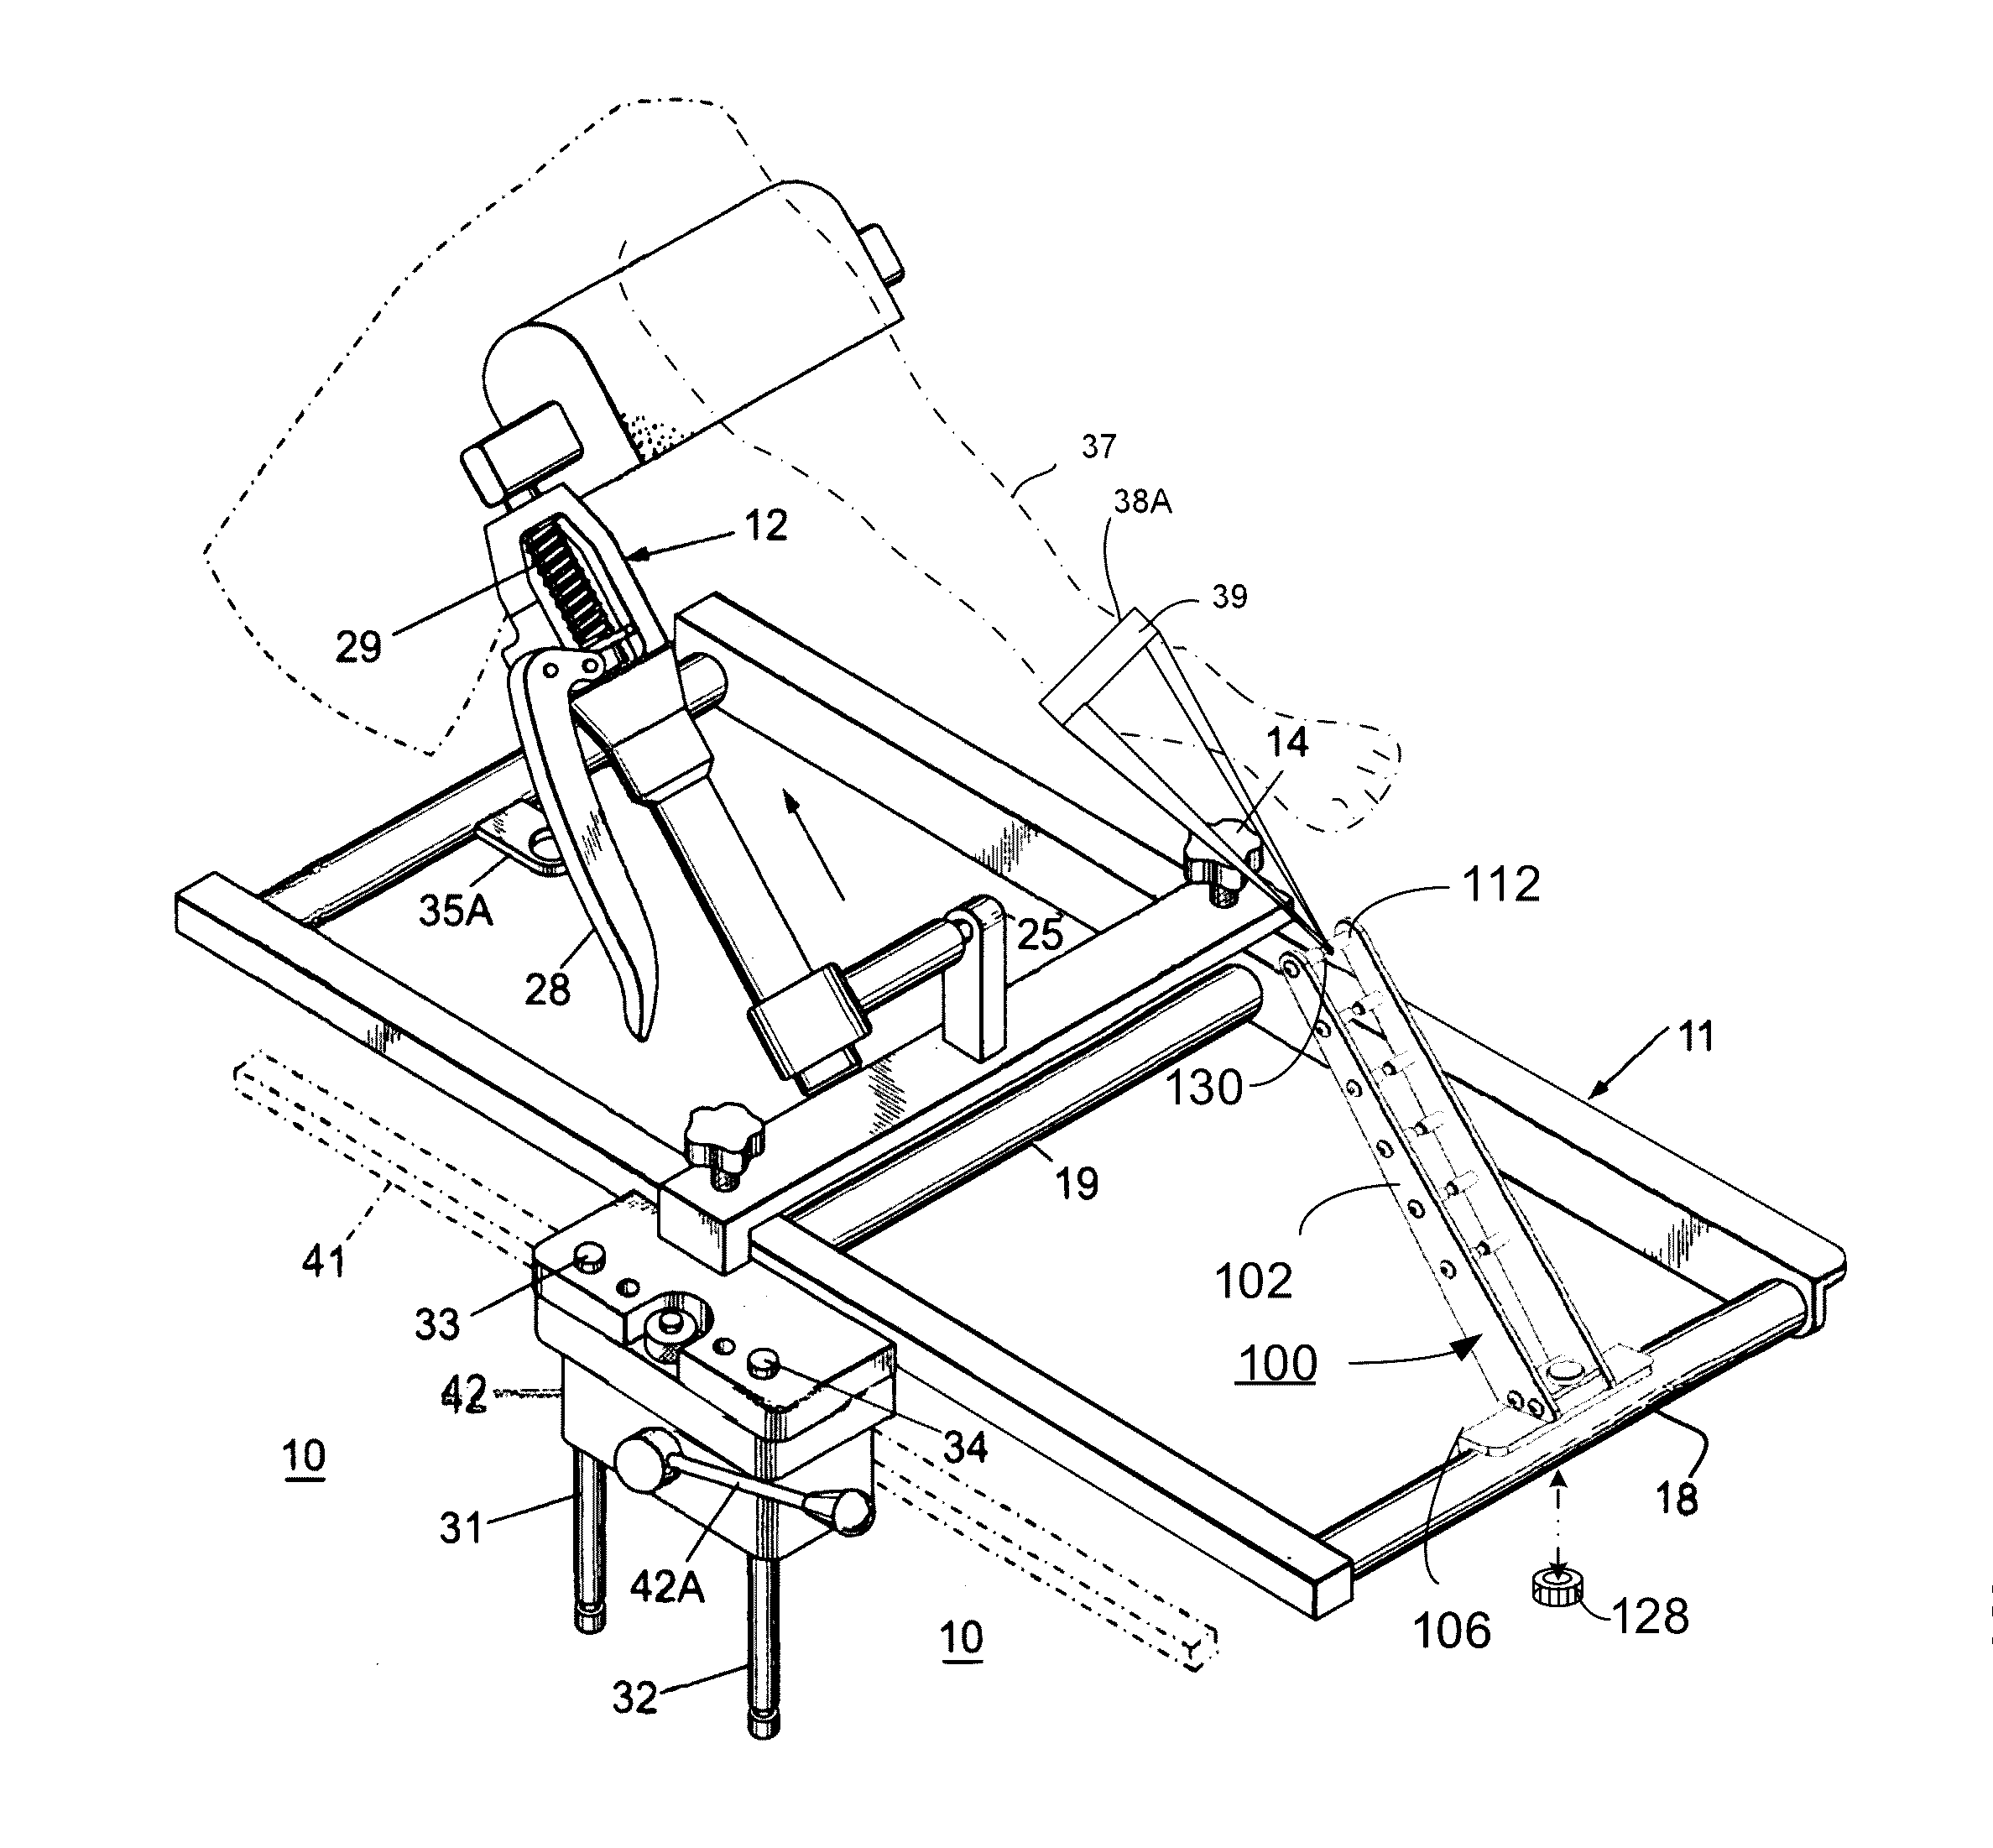 Elevation device for modular distractor for use in ankle and leg surgery